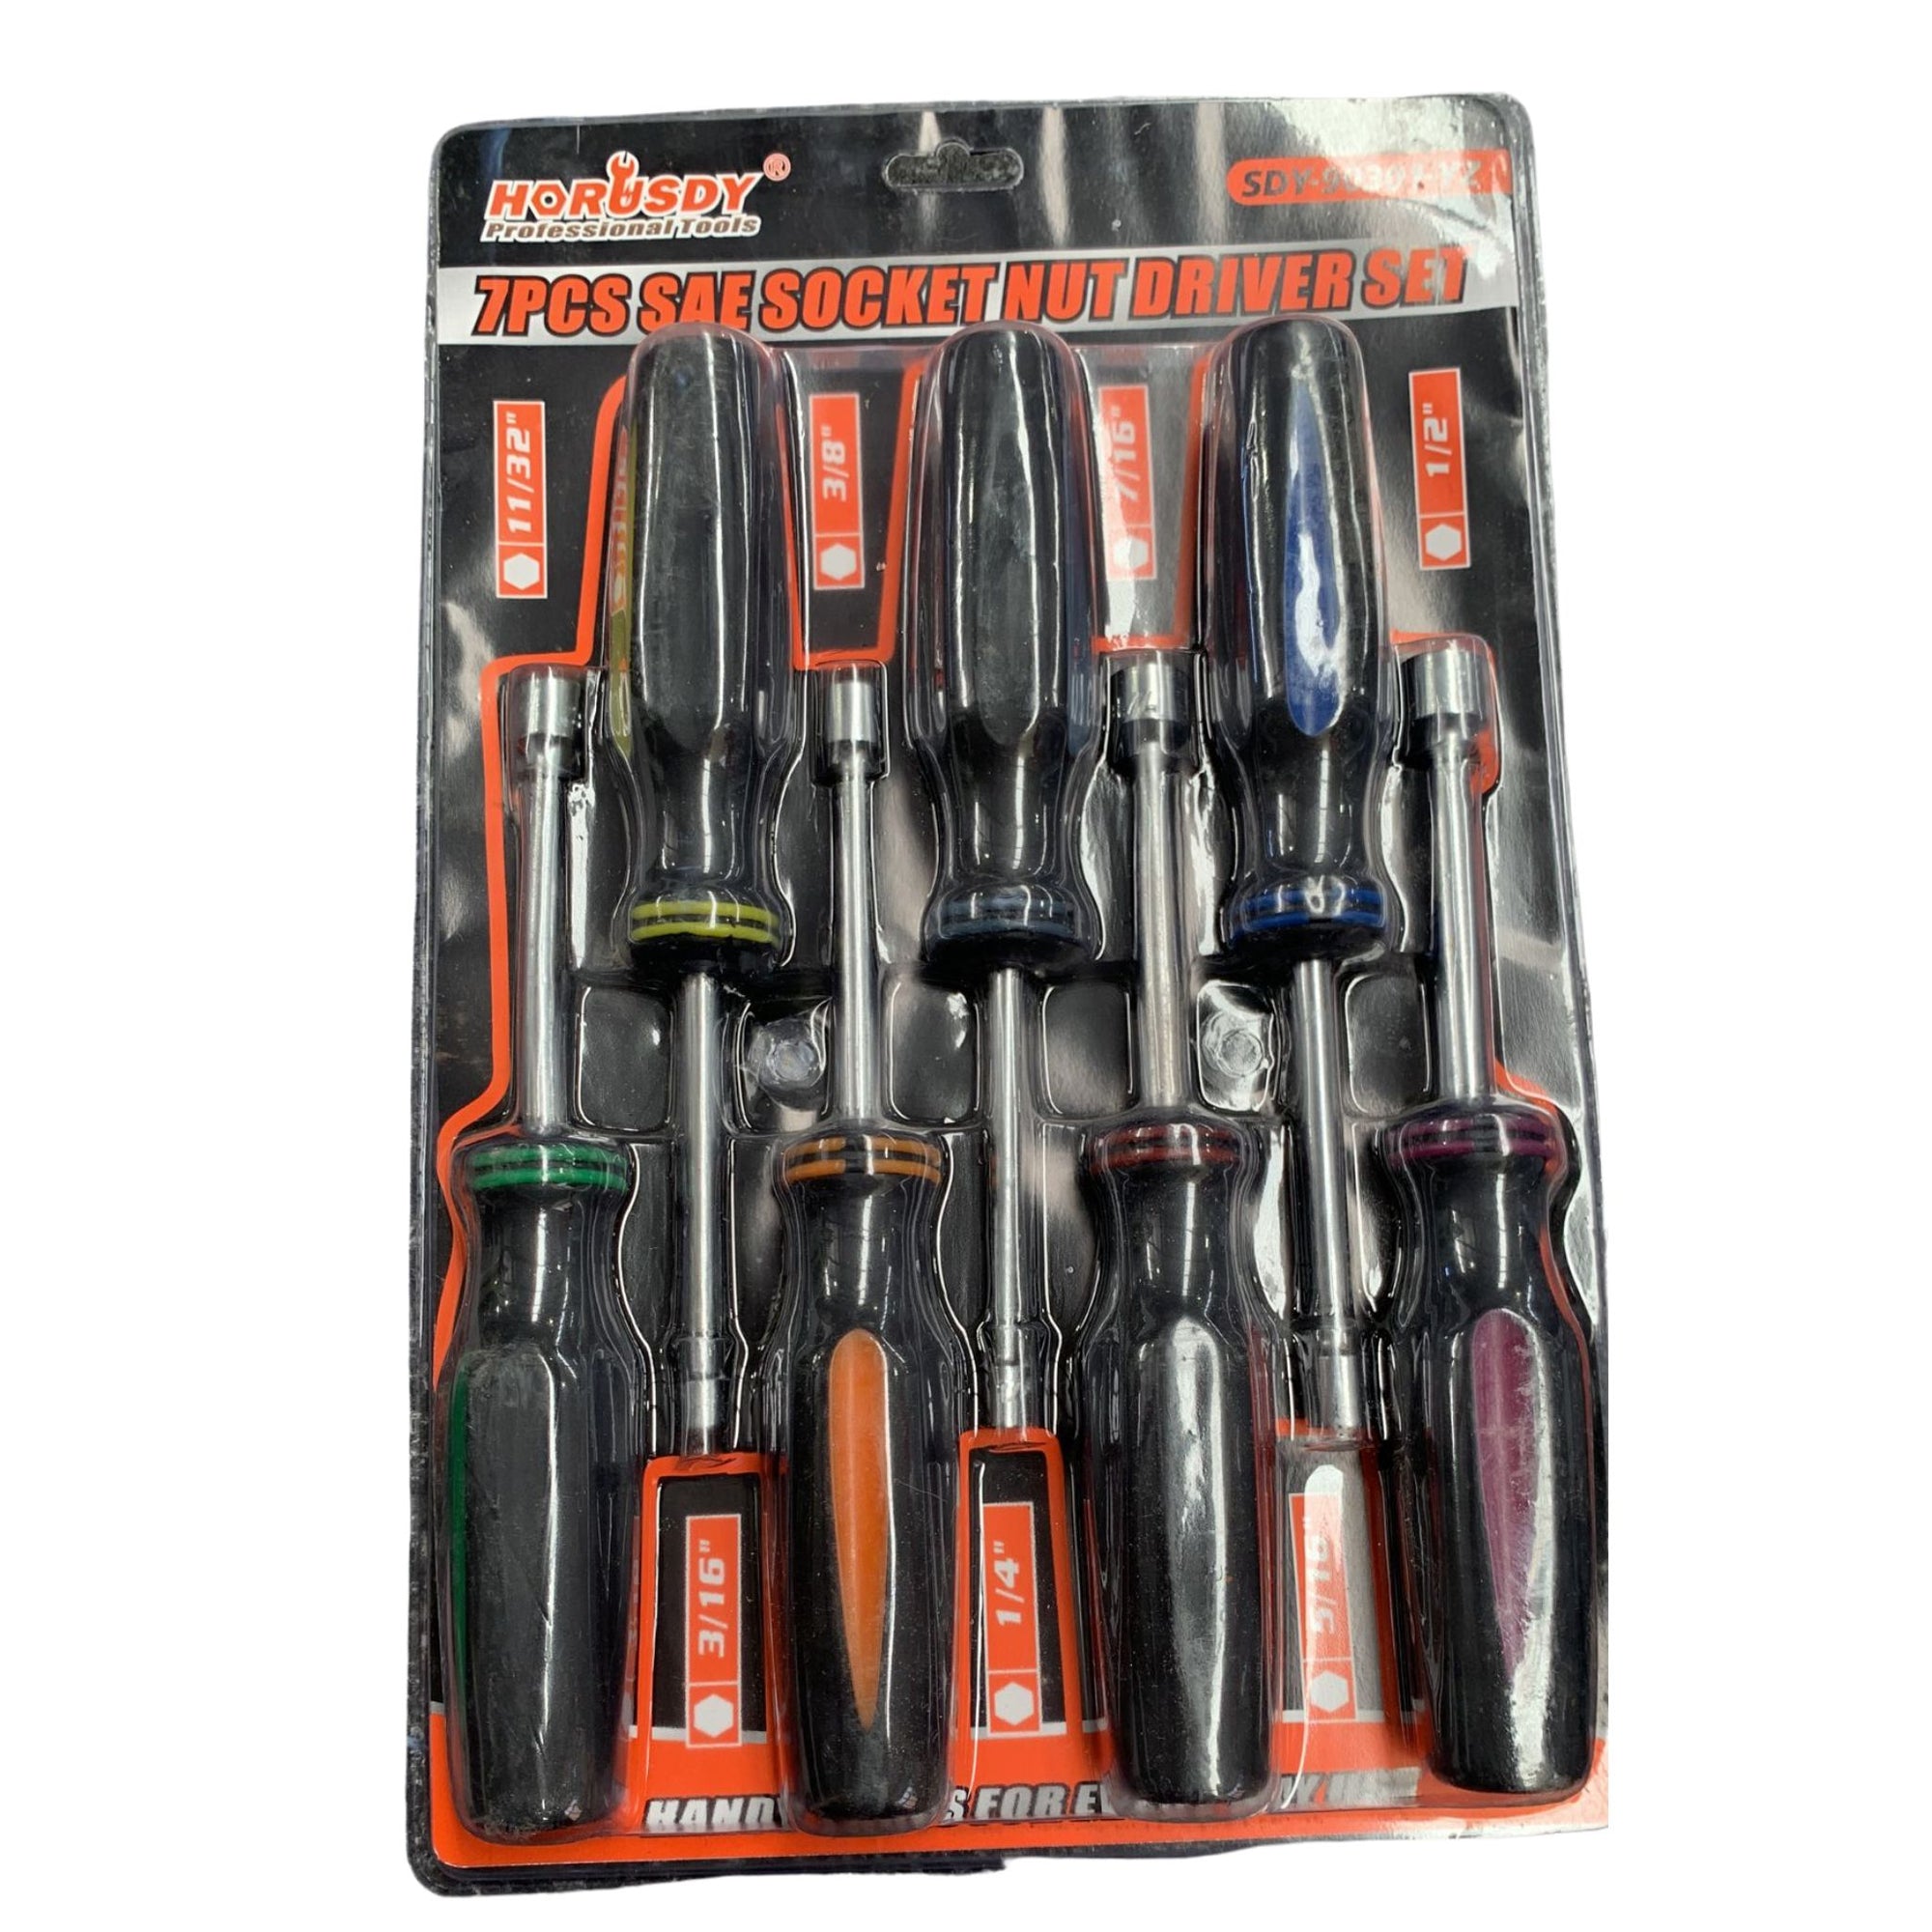 7 Piece Imperiaal Socket Driver Set - South East Clearance Centre